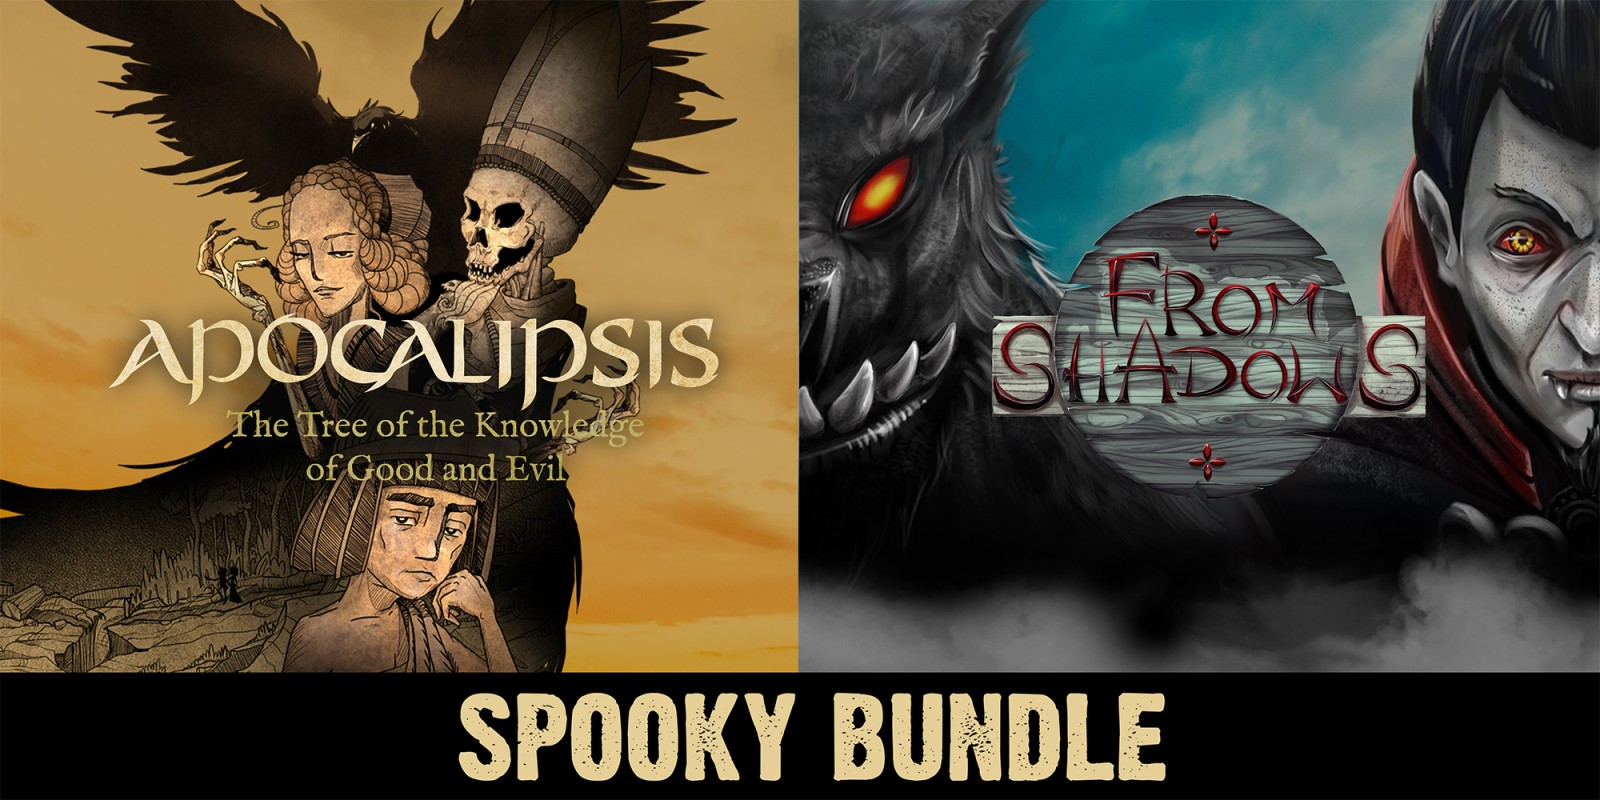 Spooky Bundle: From Shadows & Apocalipsis